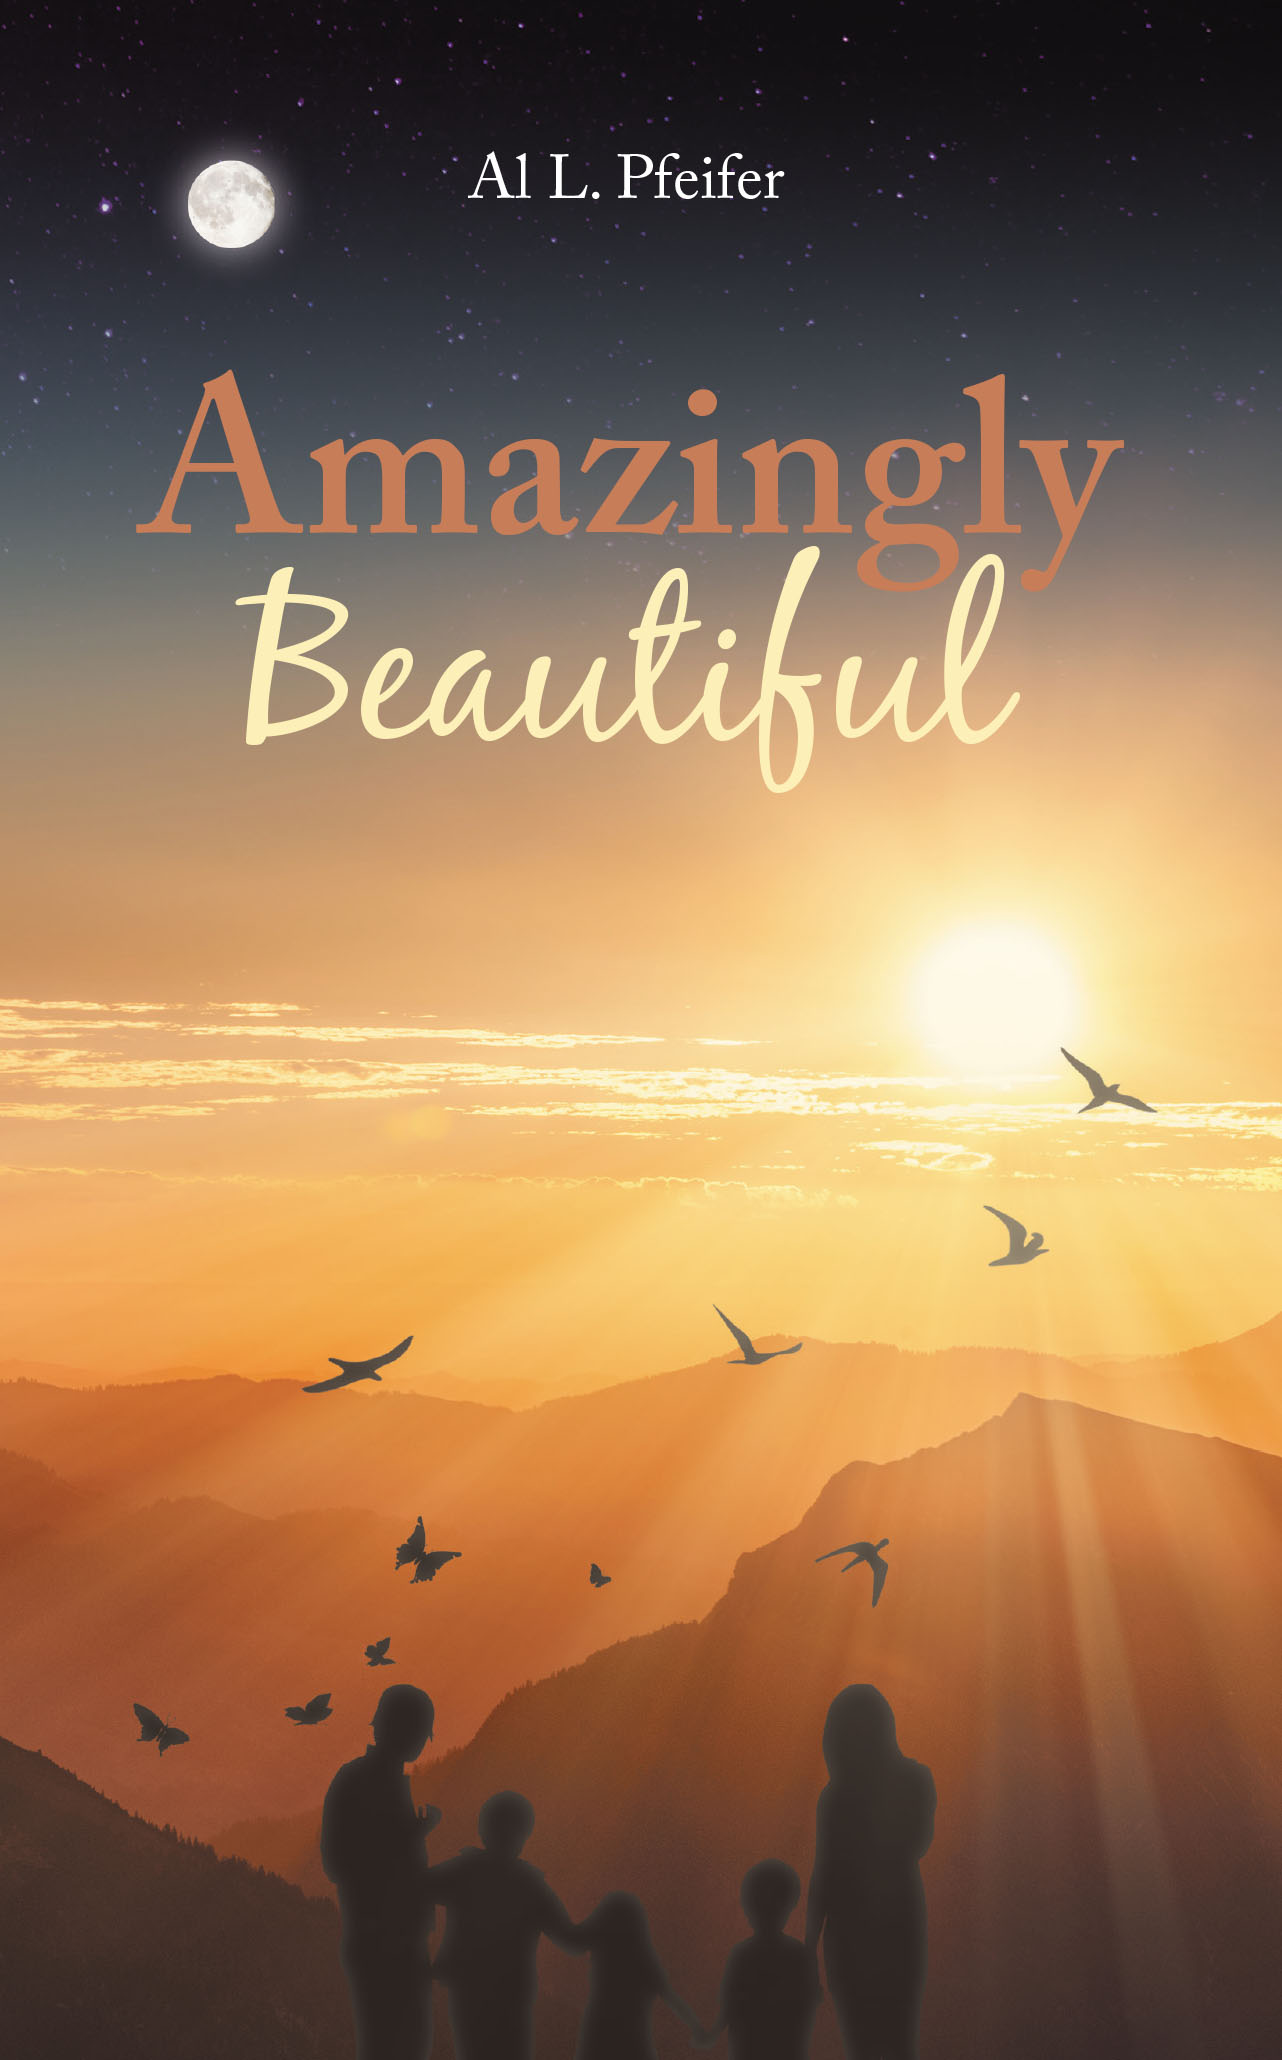 Al L. Pfeifer’s New Book, “Amazingly Beautiful,” is an Eye-Opening Collection of Writings from the Author's Heart That Help to Reveal the Lord's Truths to Readers